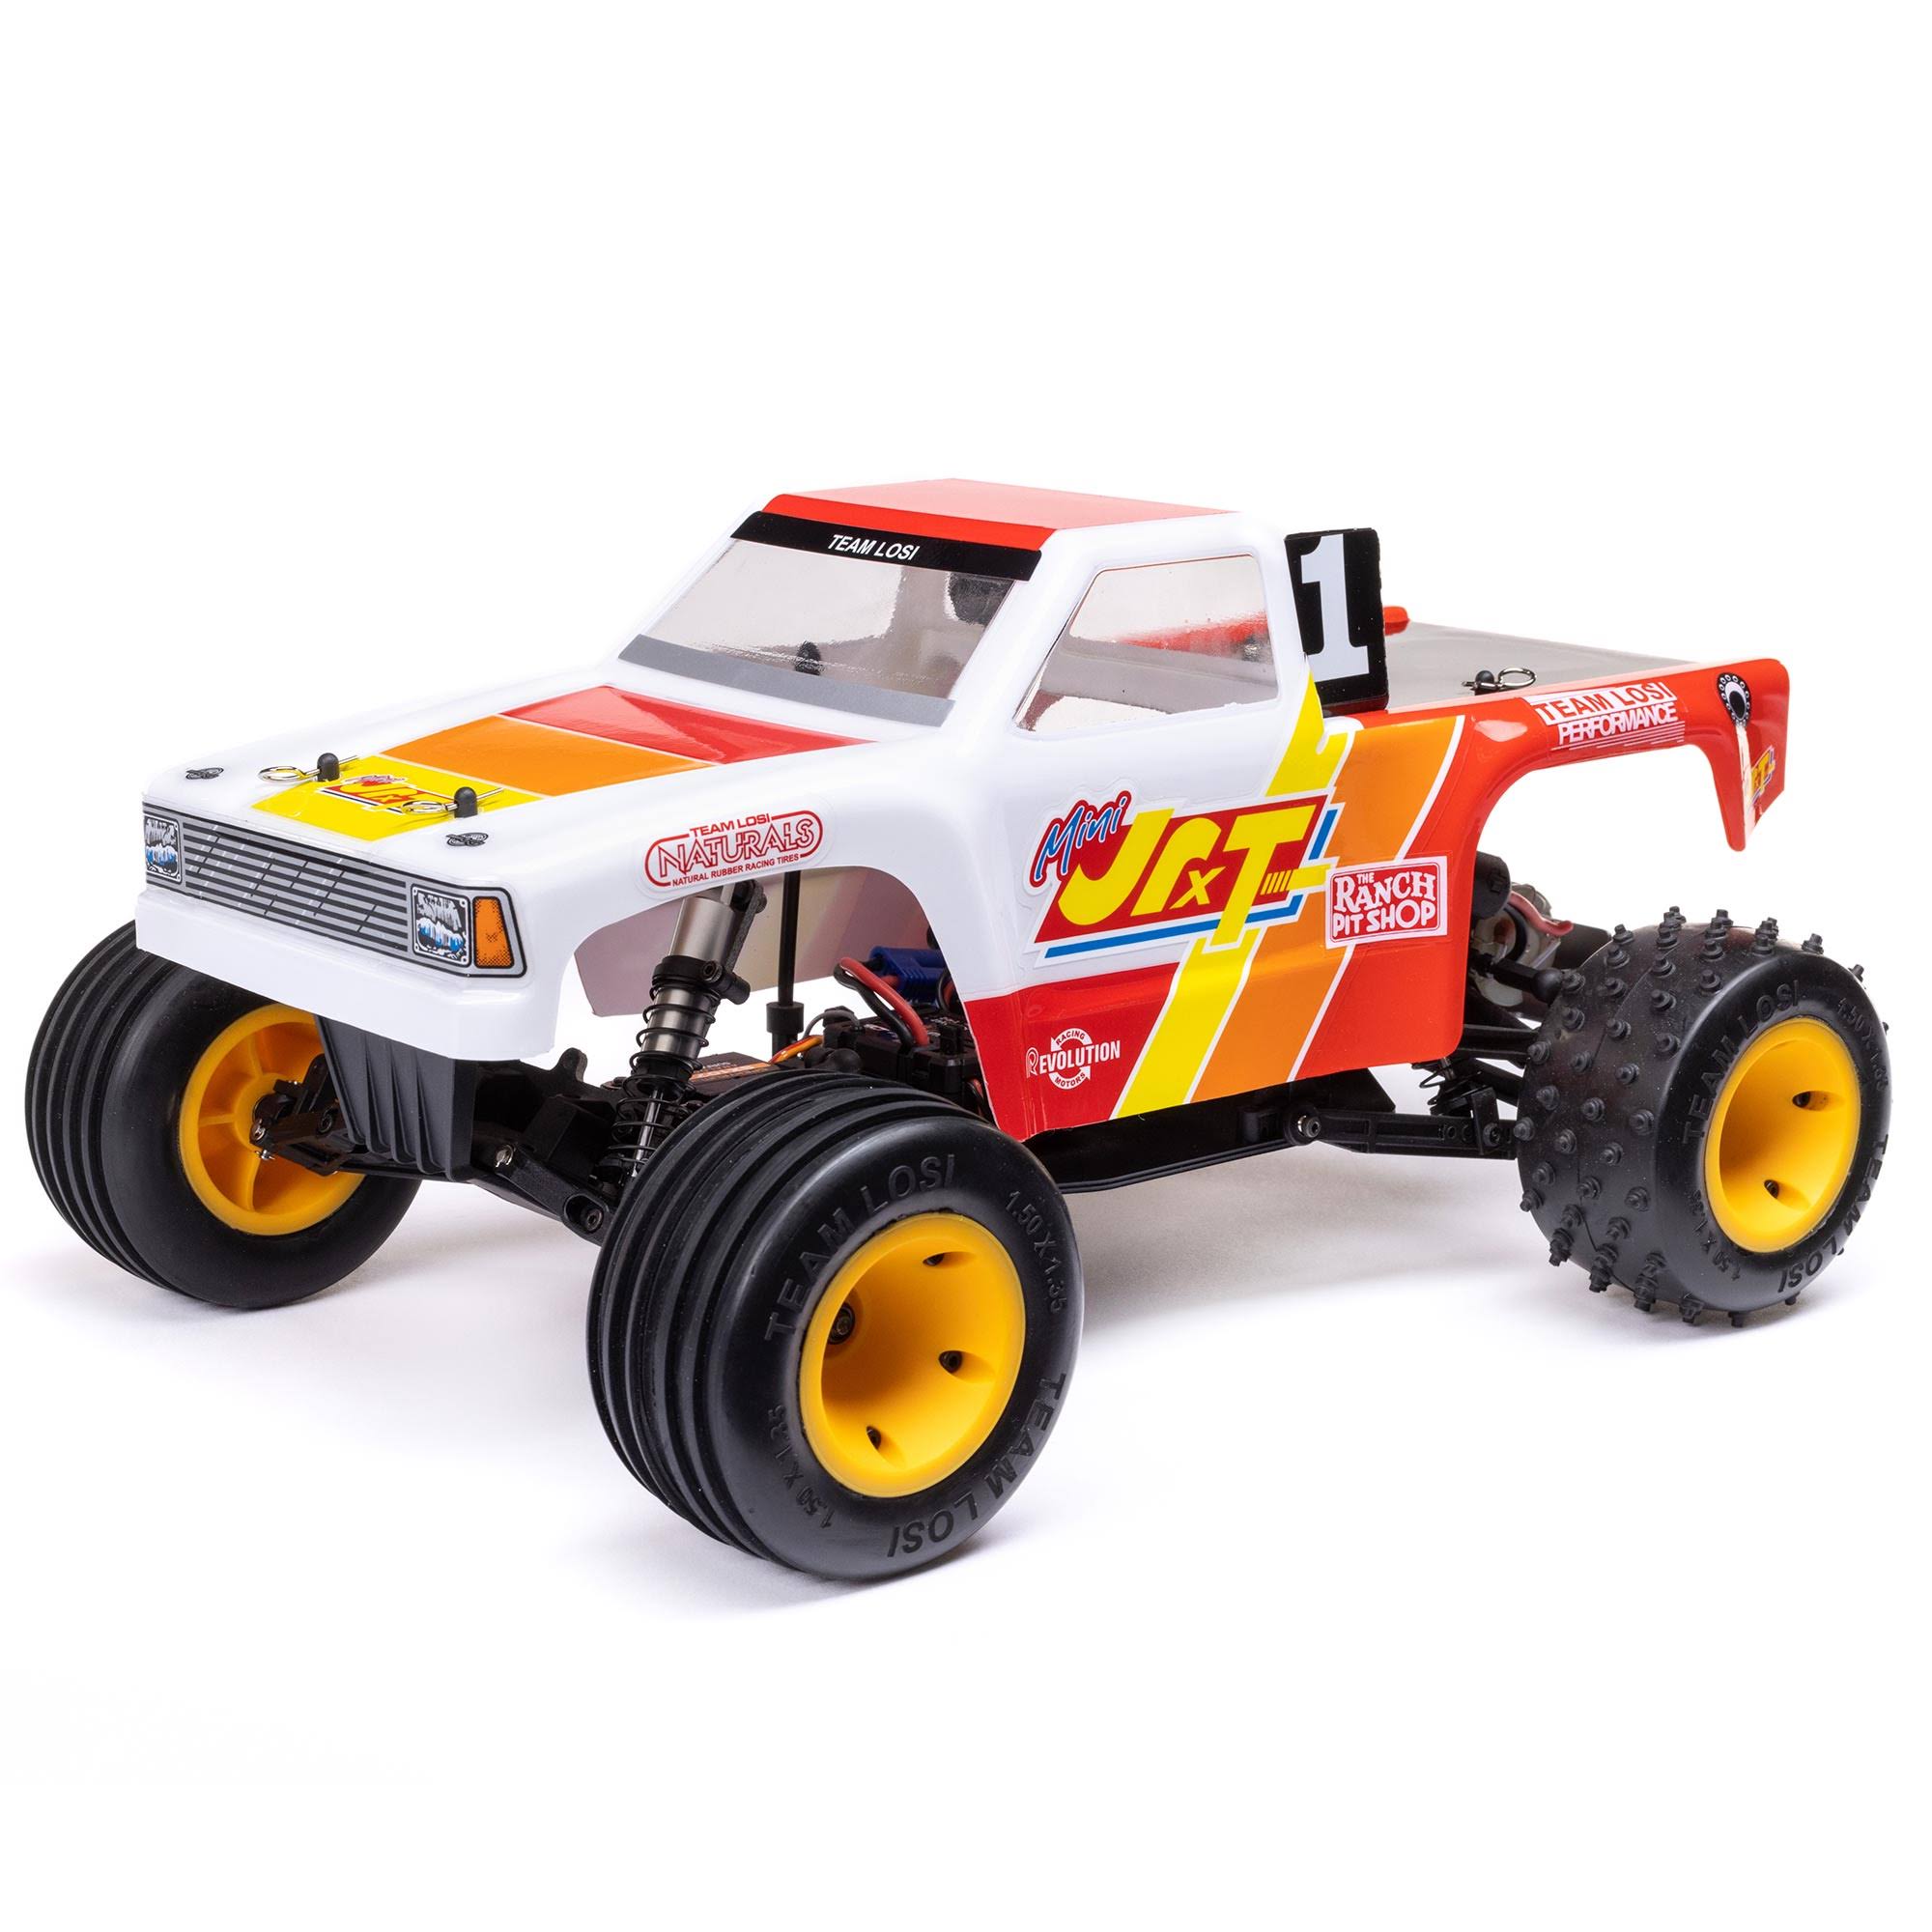 Losi JRX-T 1/16 2WD Stadium Truck RTR Red and White LOS01021